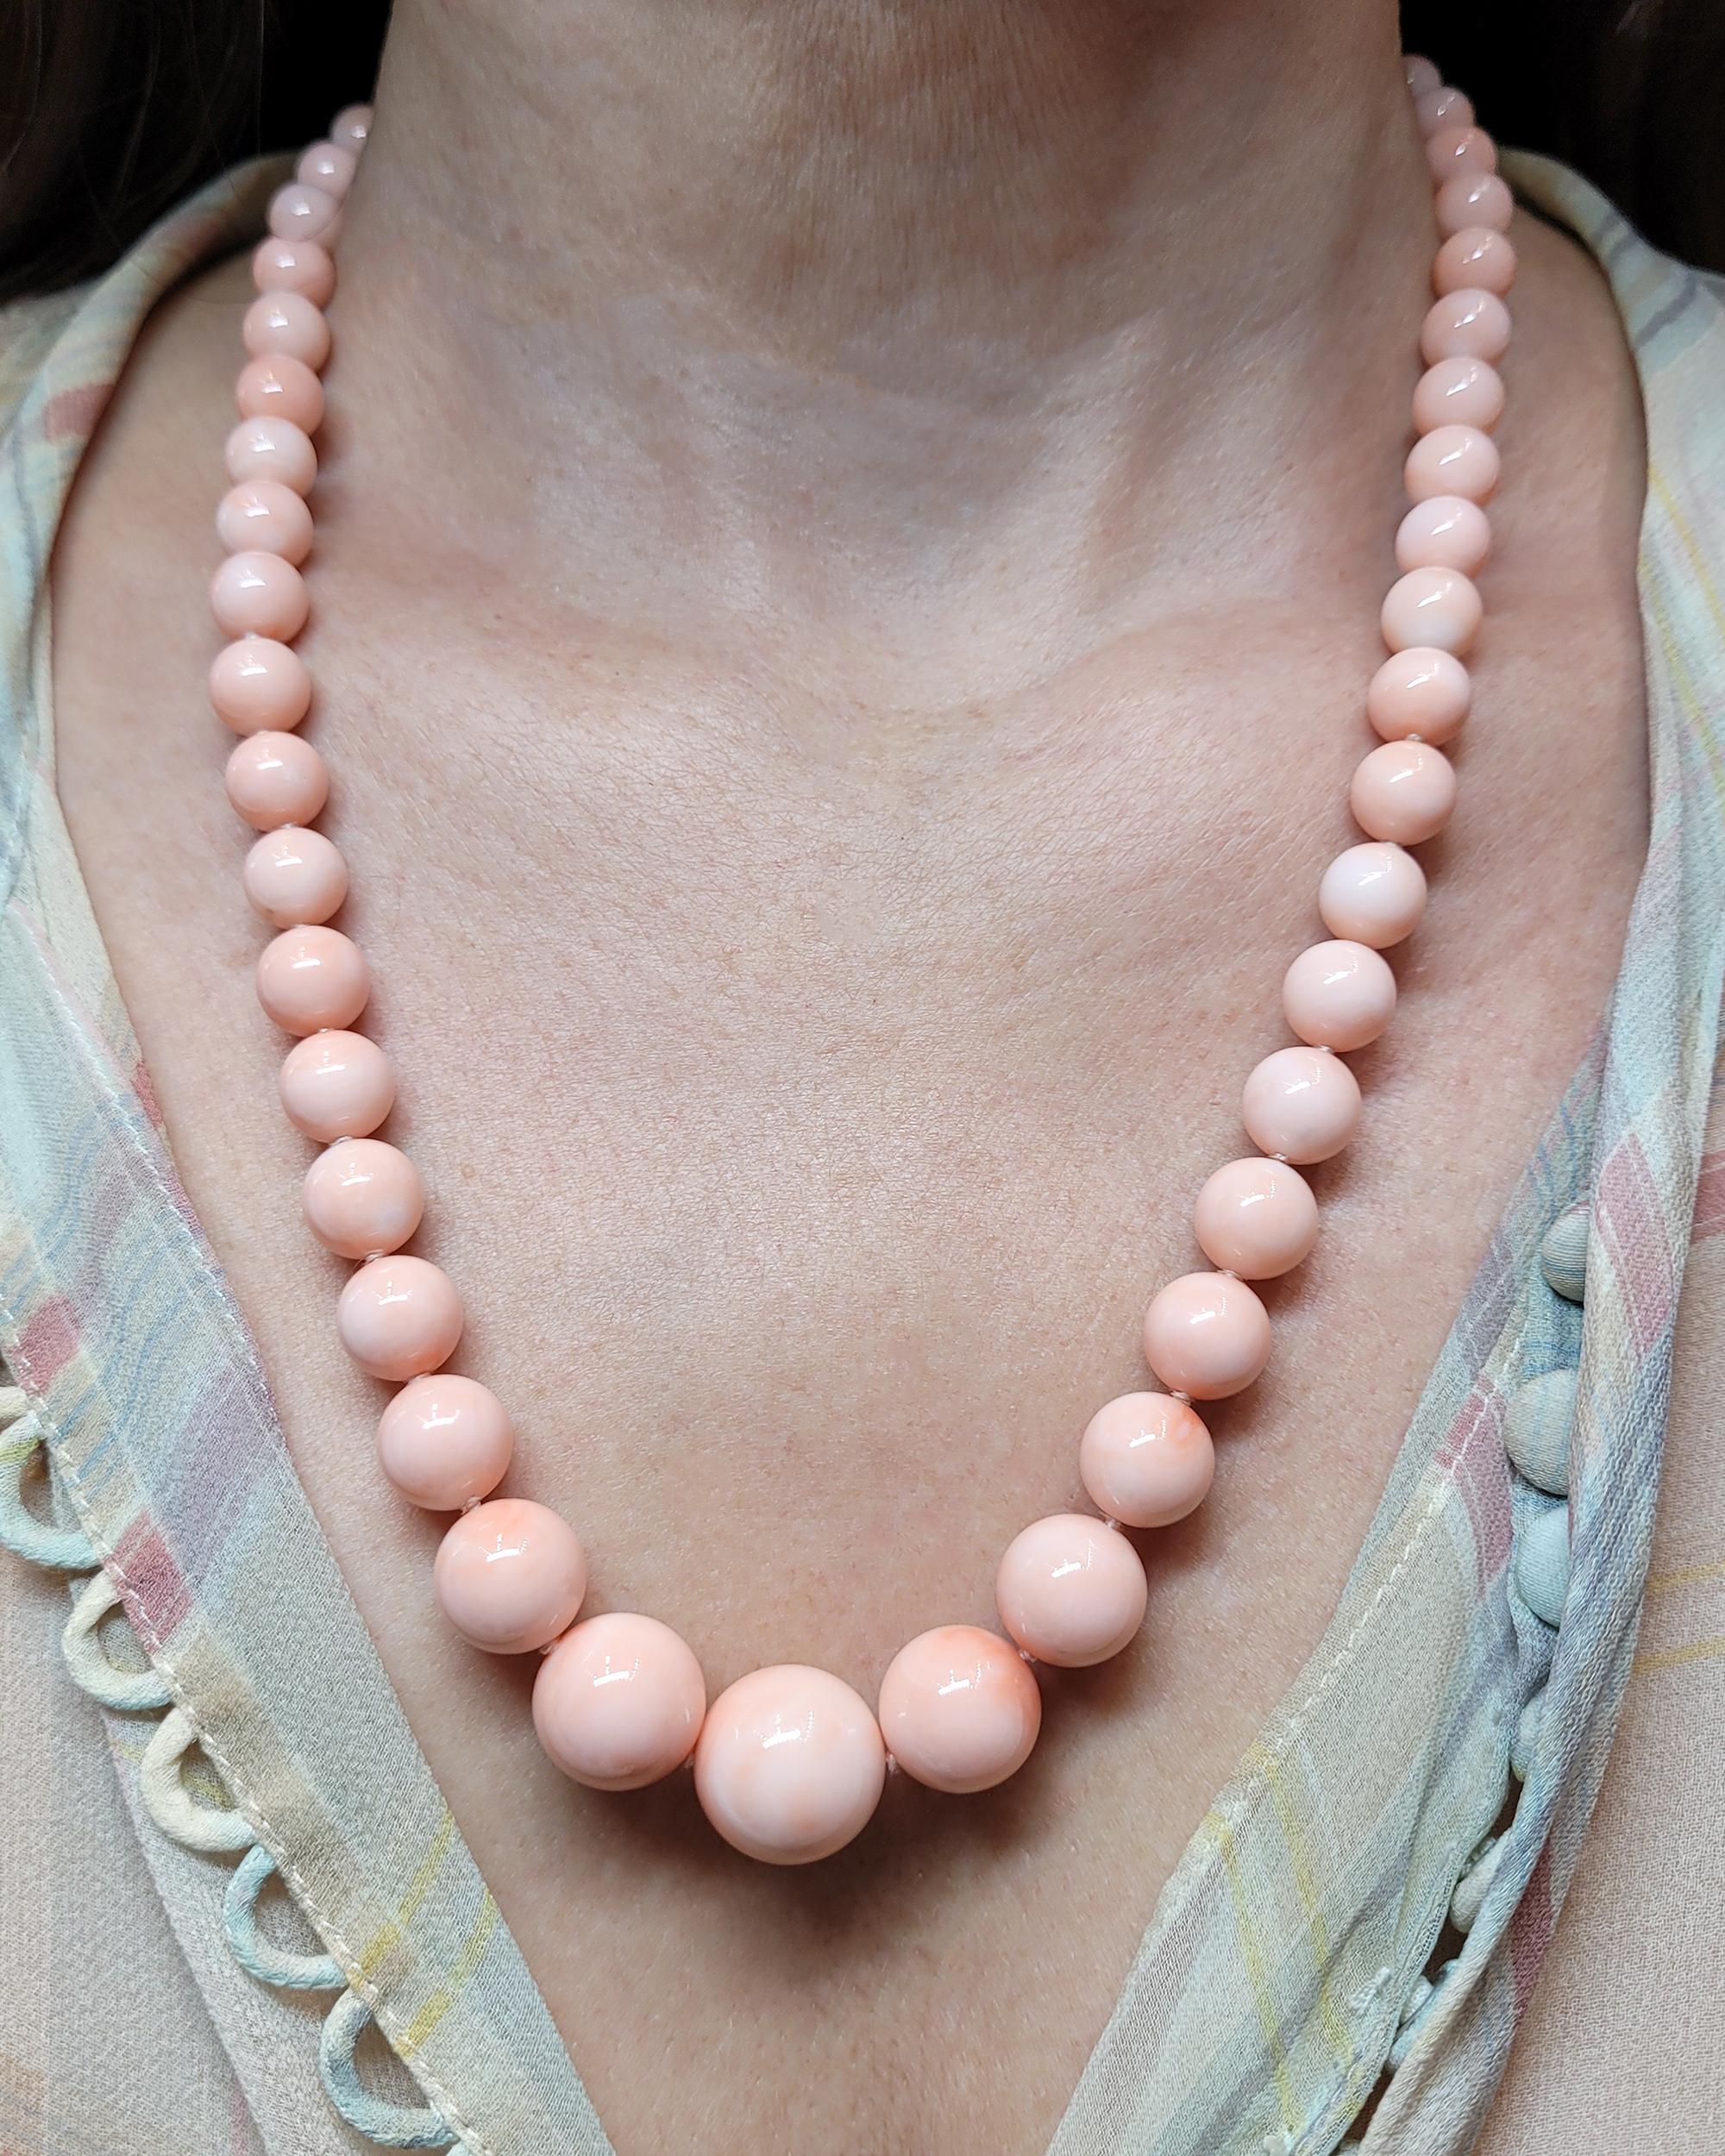 Get ready to steal the spotlight with this remarkable piece!
This stunning necklace features 57 thoroughly handpicked coral beads, each radiating a mesmerizing gradient of pastel pinks to deep oranges. These coral beads are like a sunset captured in